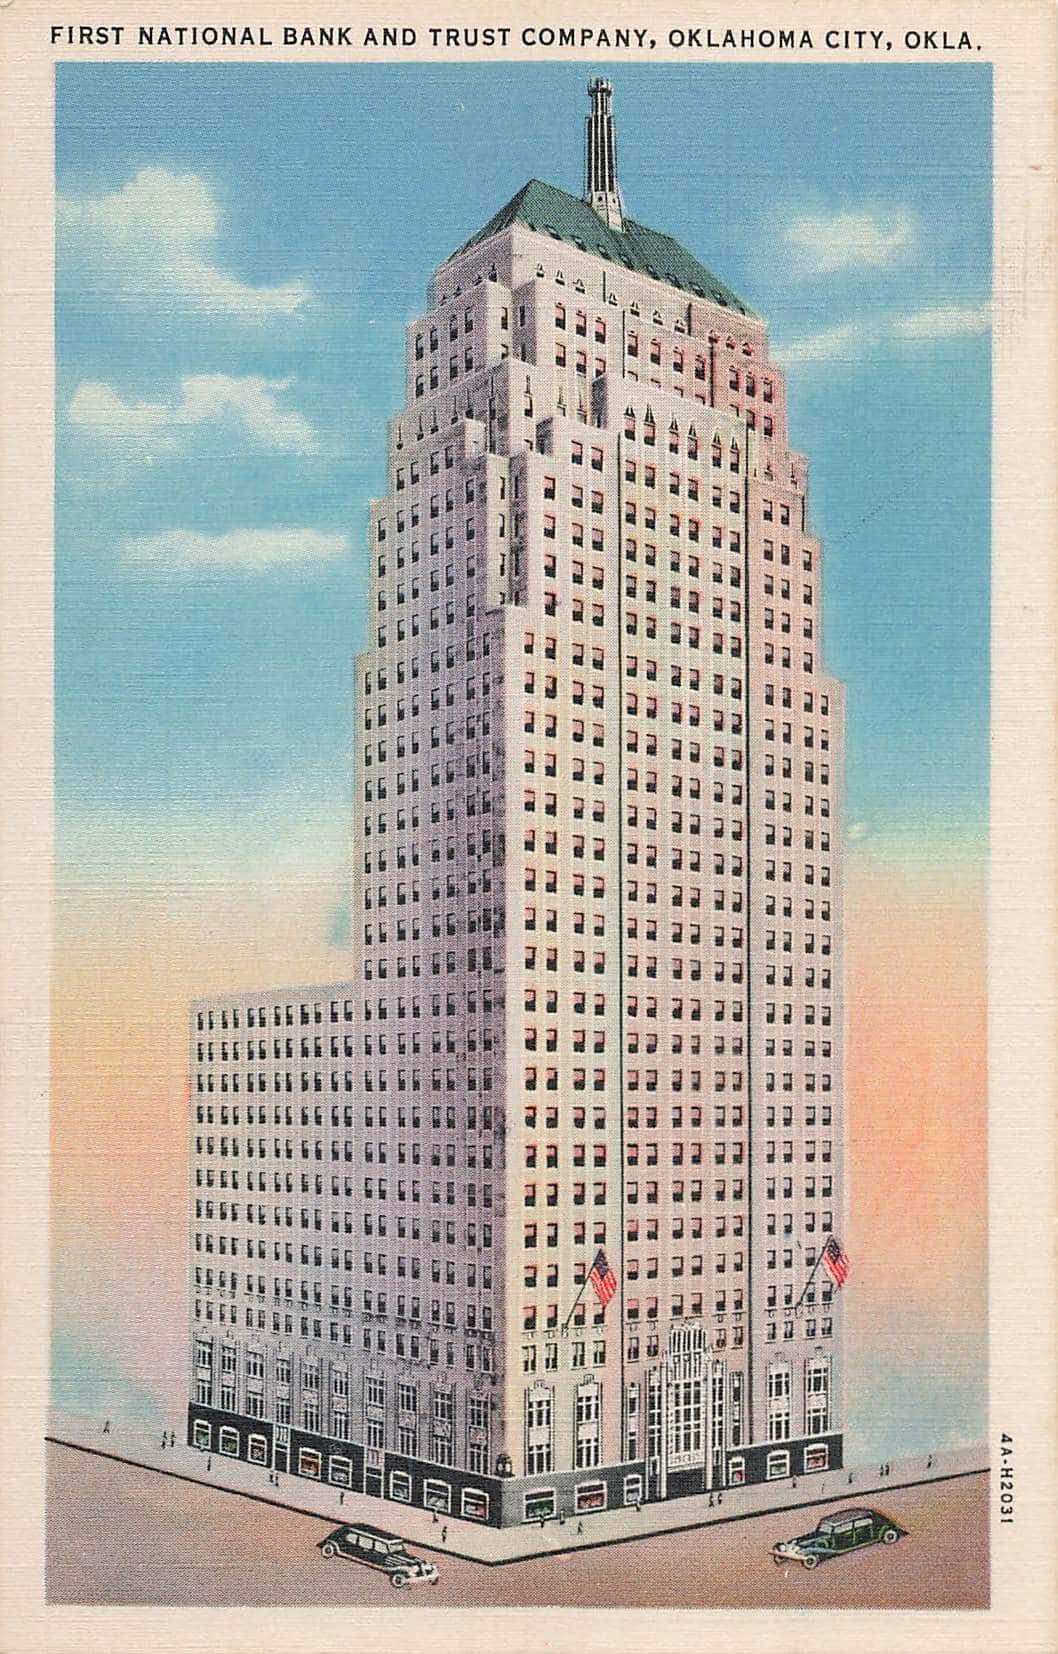 First national bank of oklahoma city, as imagined in this 1931 postcard.